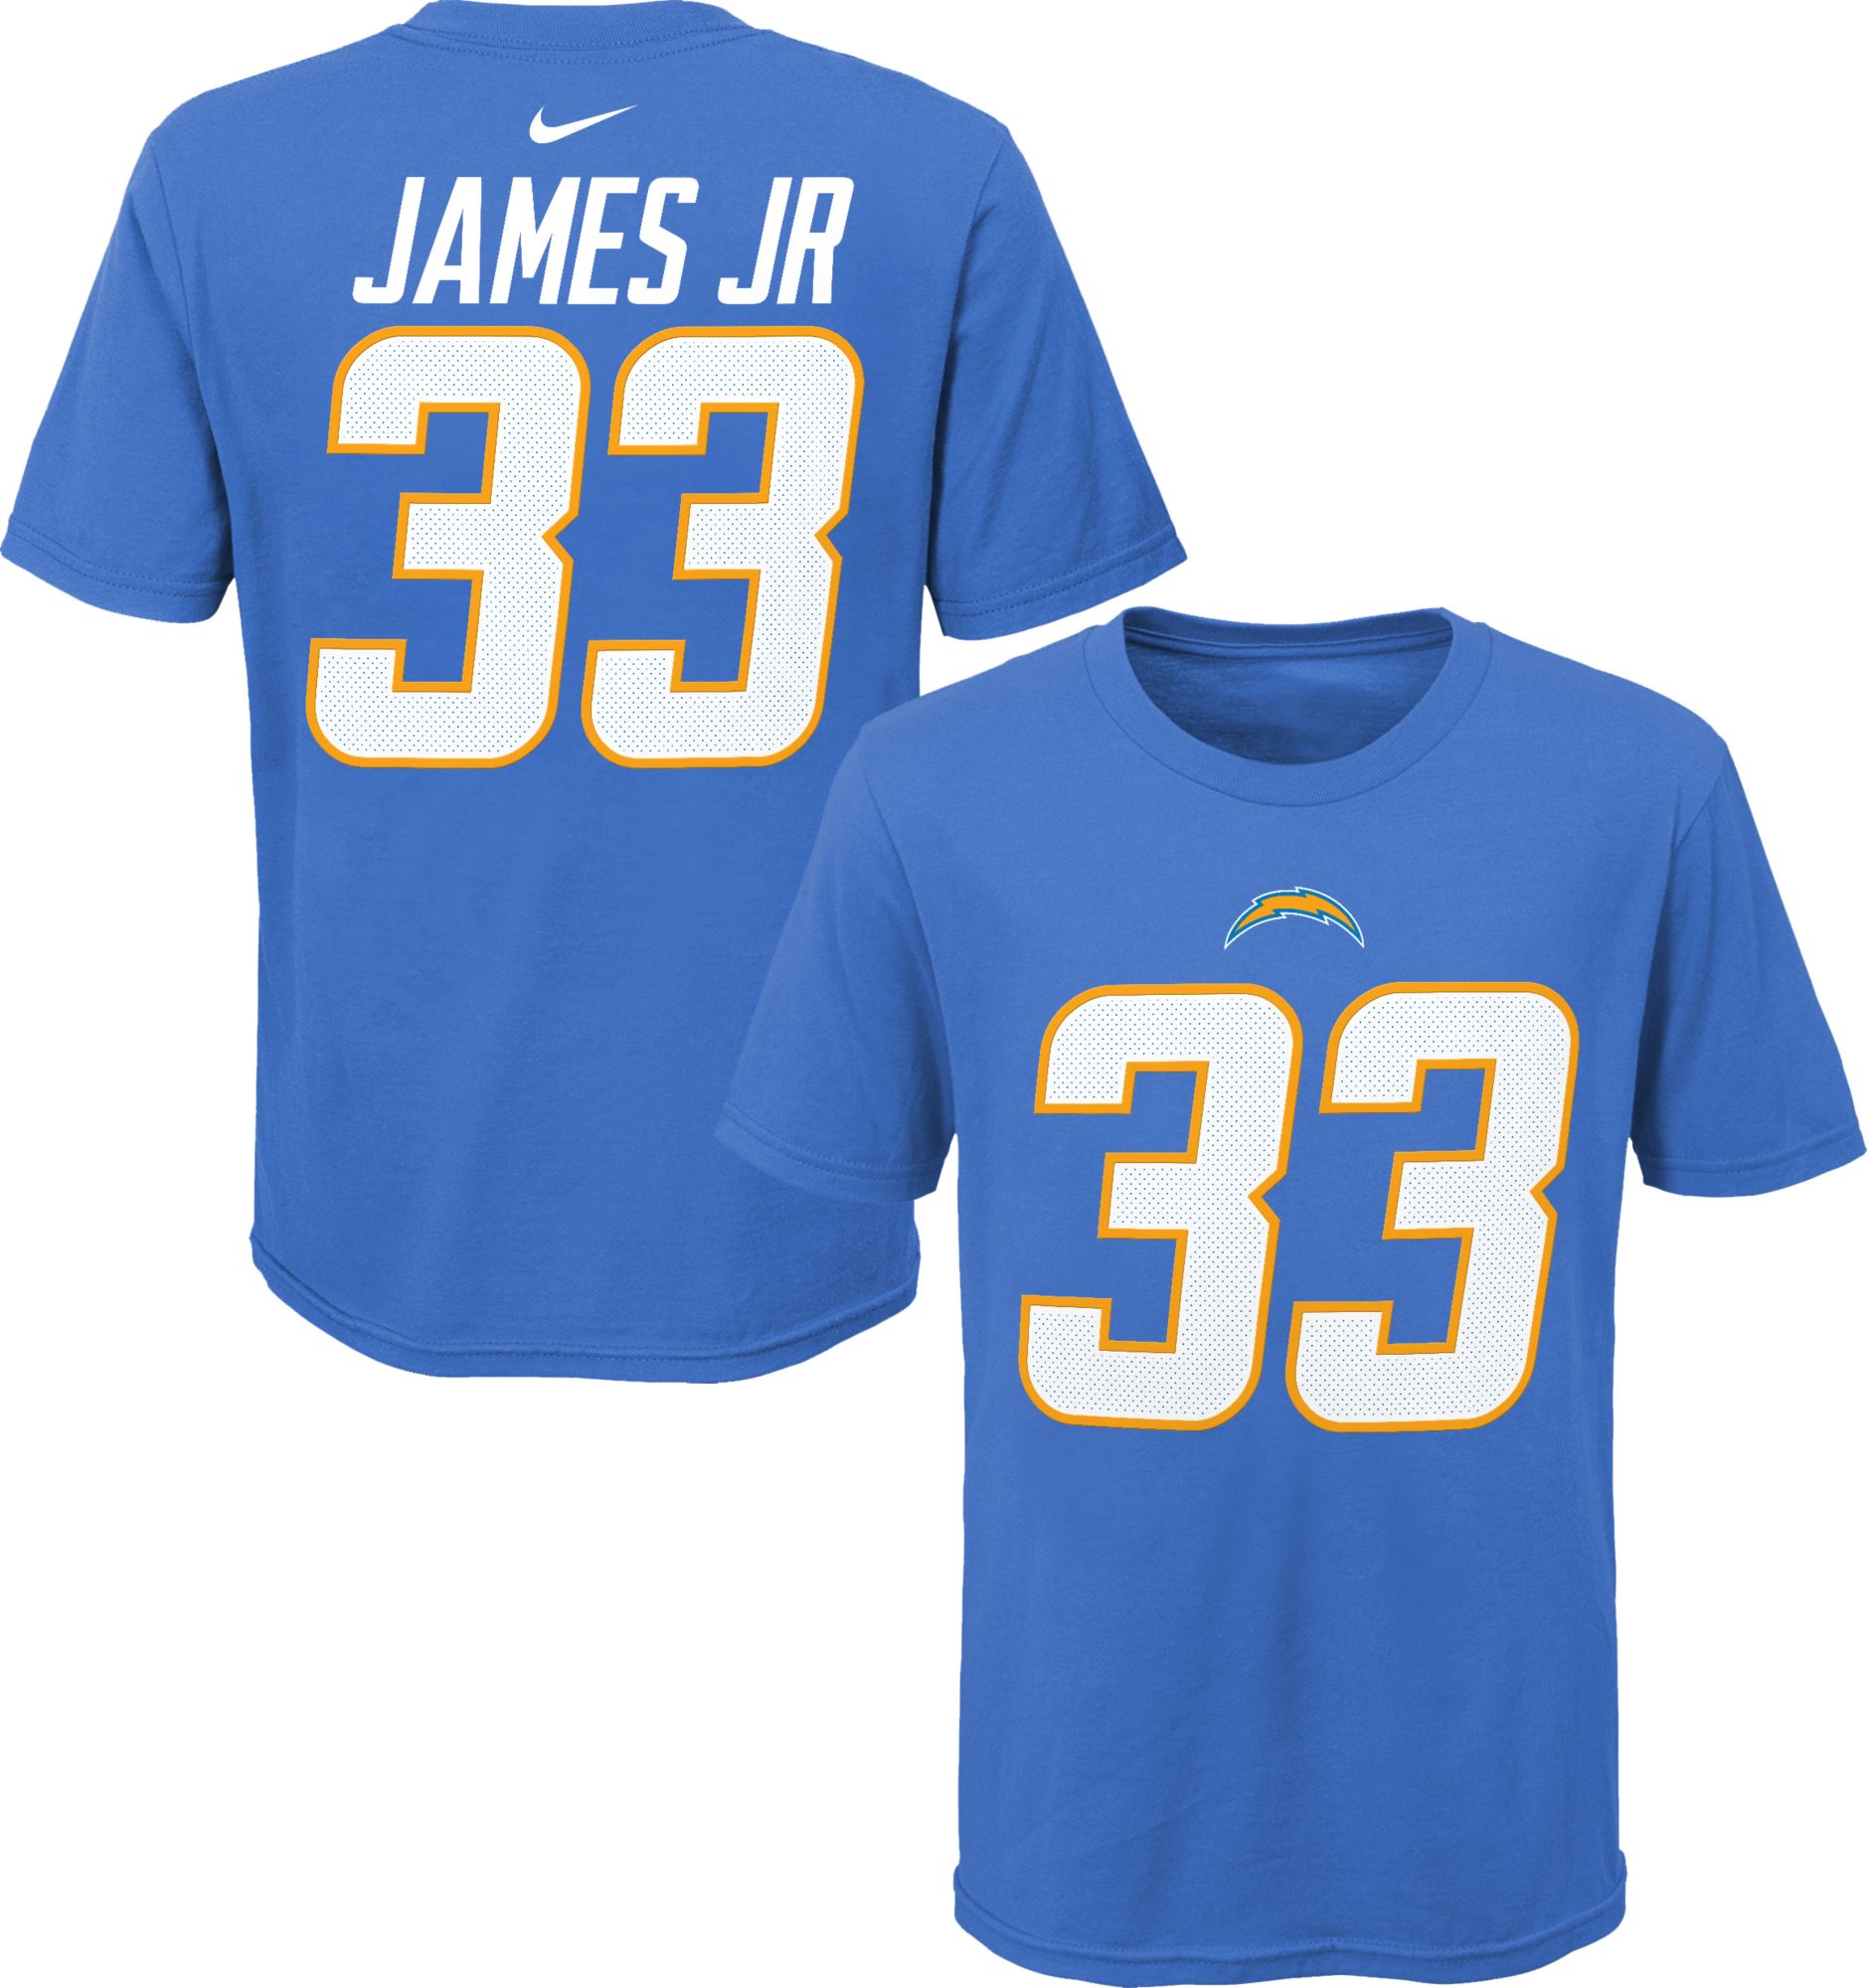 Nike / NFL Team Apparel Youth Los Angeles Chargers Derwin James Jr. #85  Blue Player T-Shirt